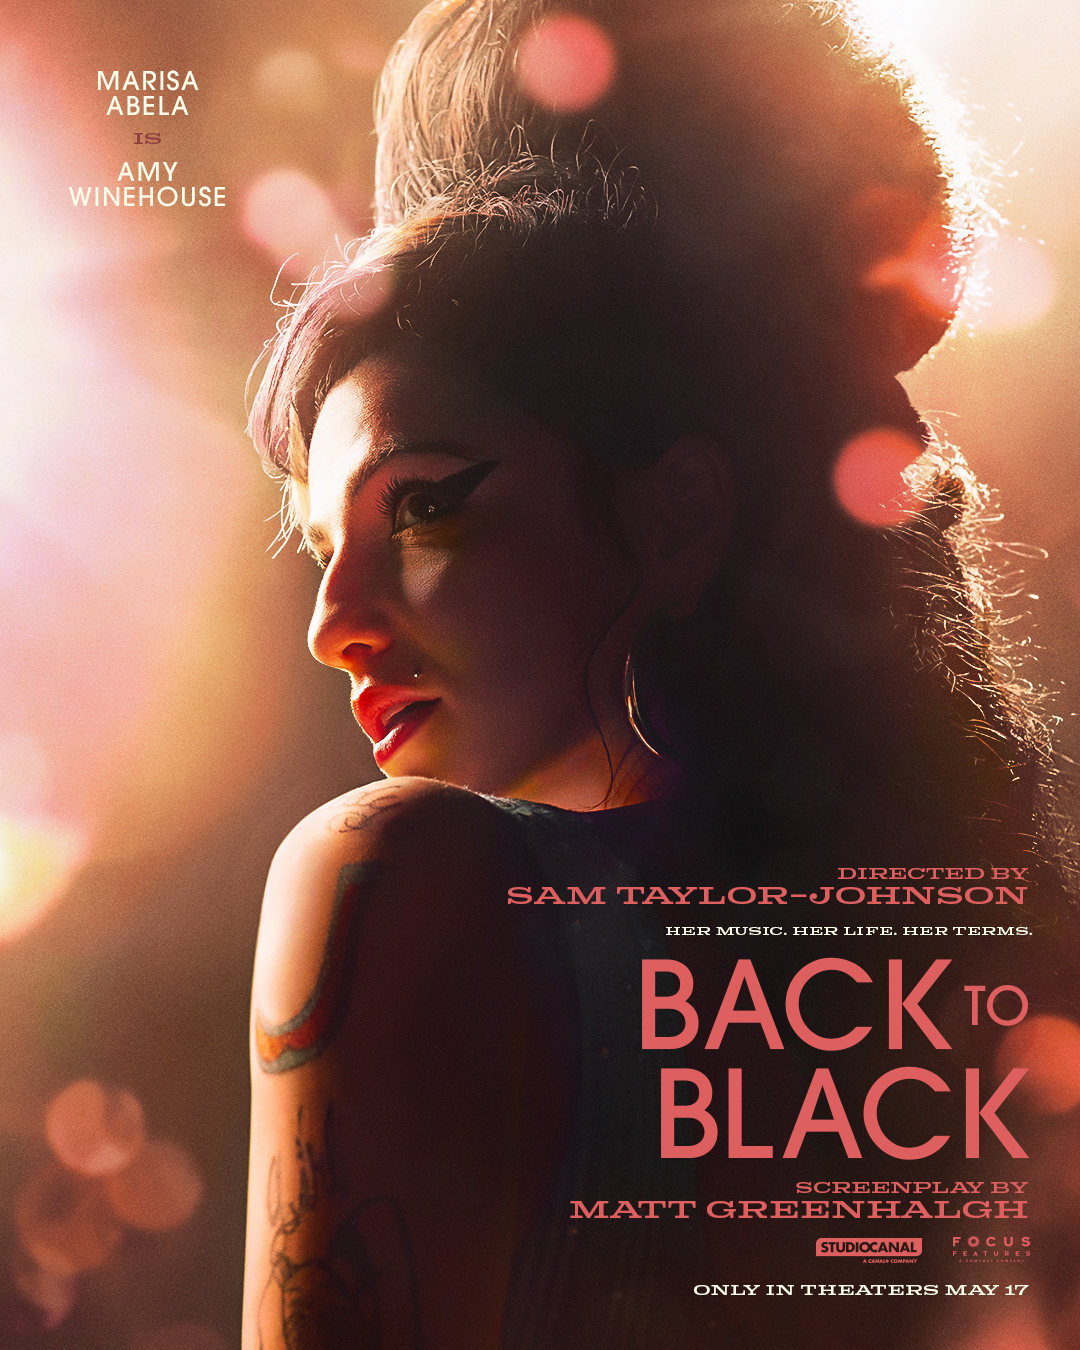 Poster for &quot;Back to Black&quot; film with Marisa Abela as Amy Winehouse, side profile, tattoos visible. In theaters May 17